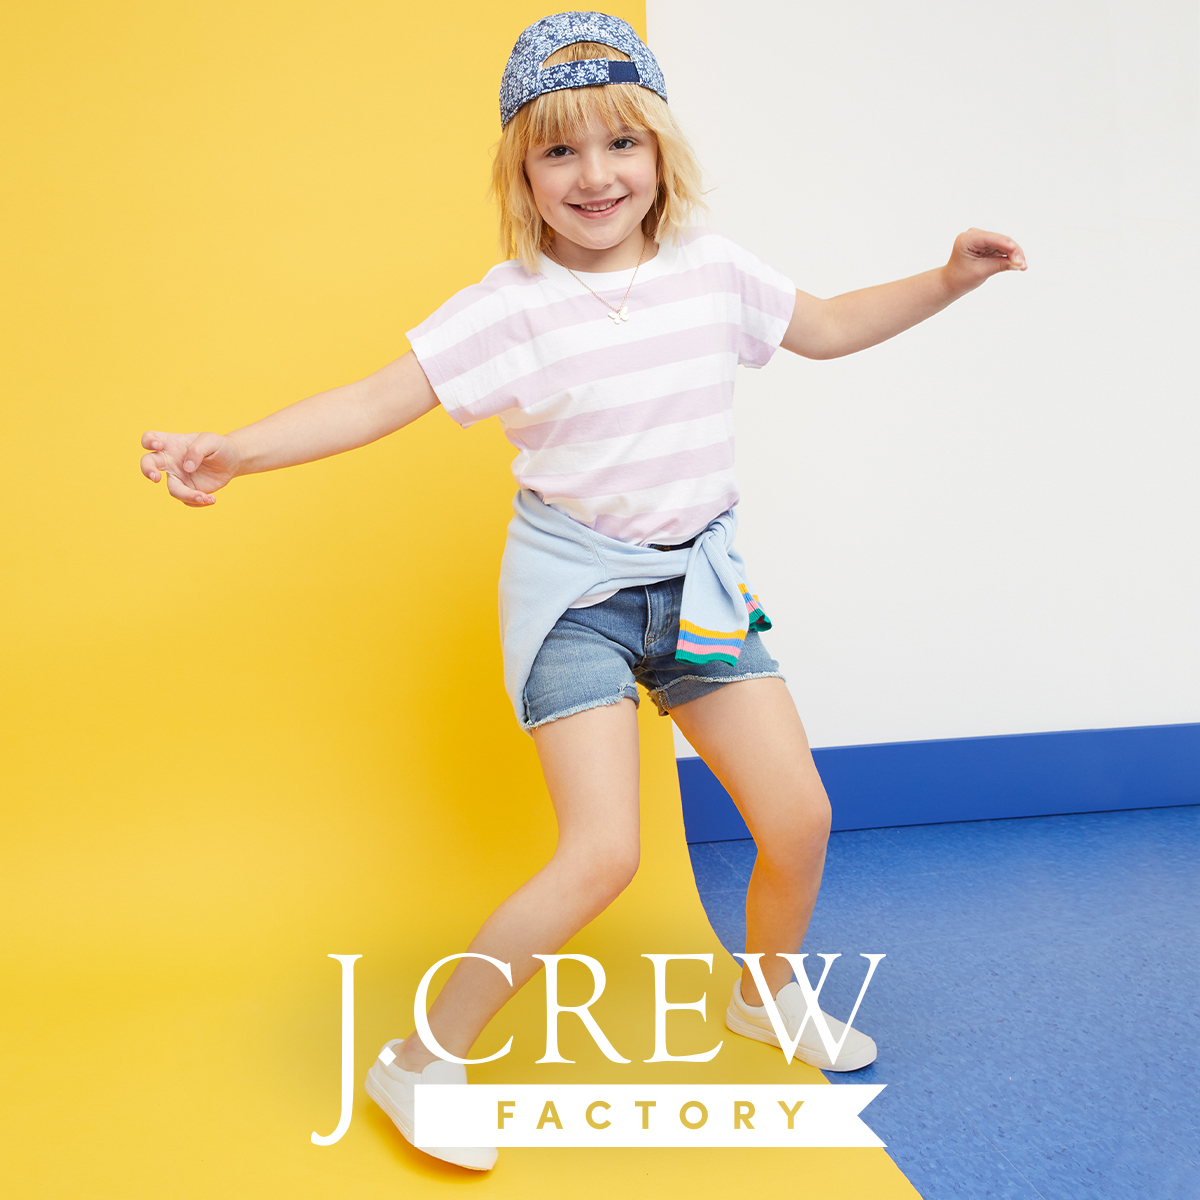 40% - 70% off storewide + extra 70% off clearance styles! from J.Crew Factory